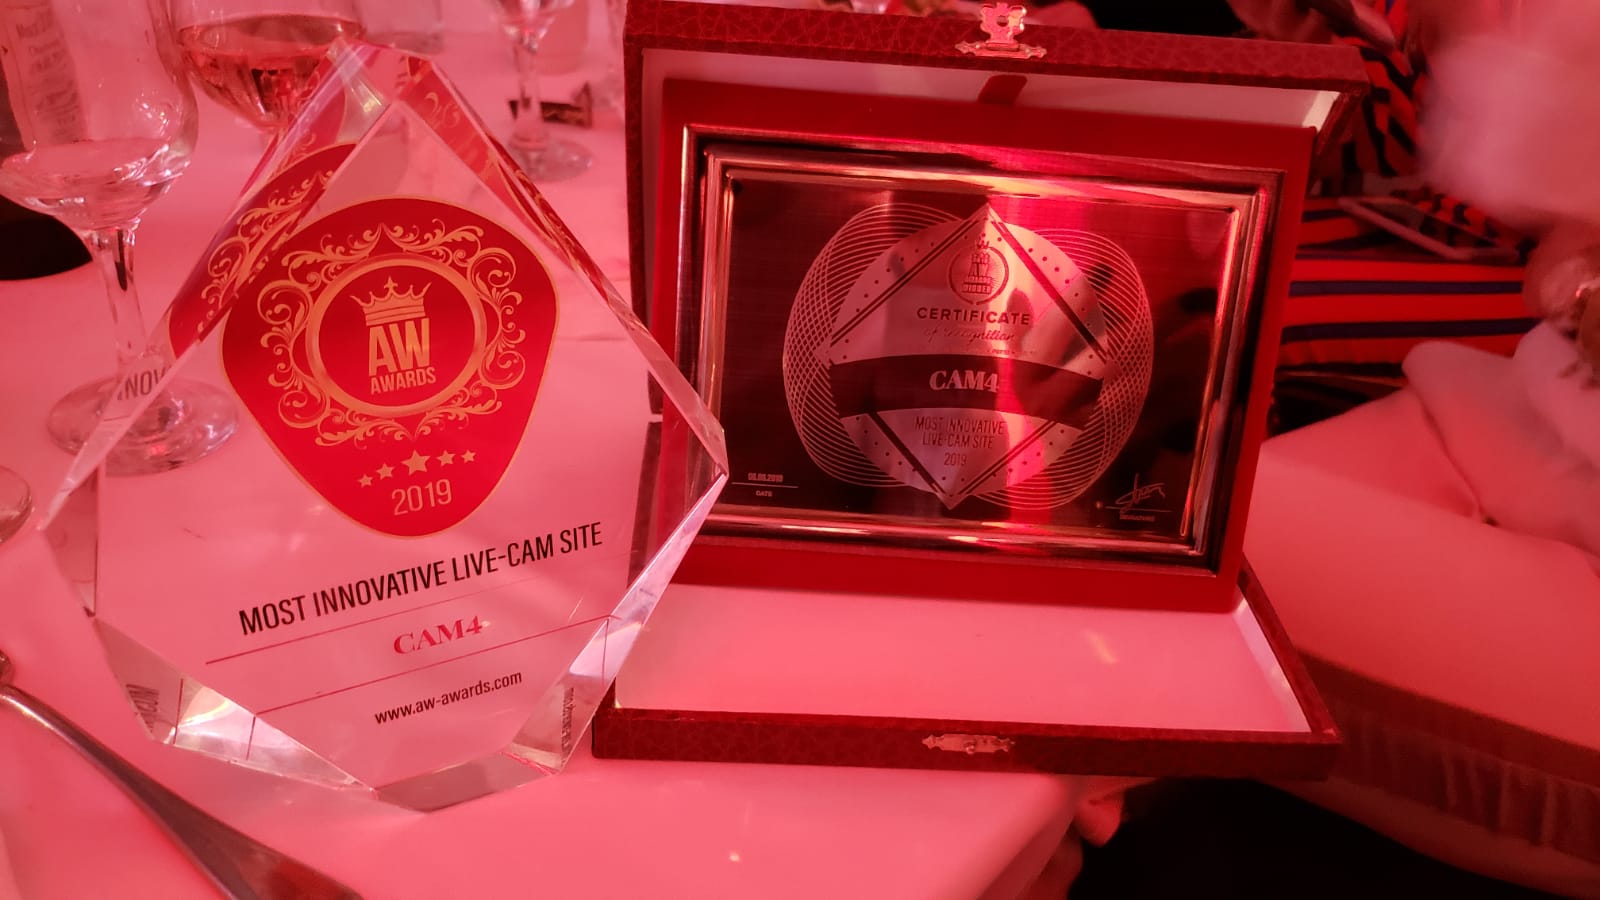 CAM4 Takes Home New Awards in Romania!